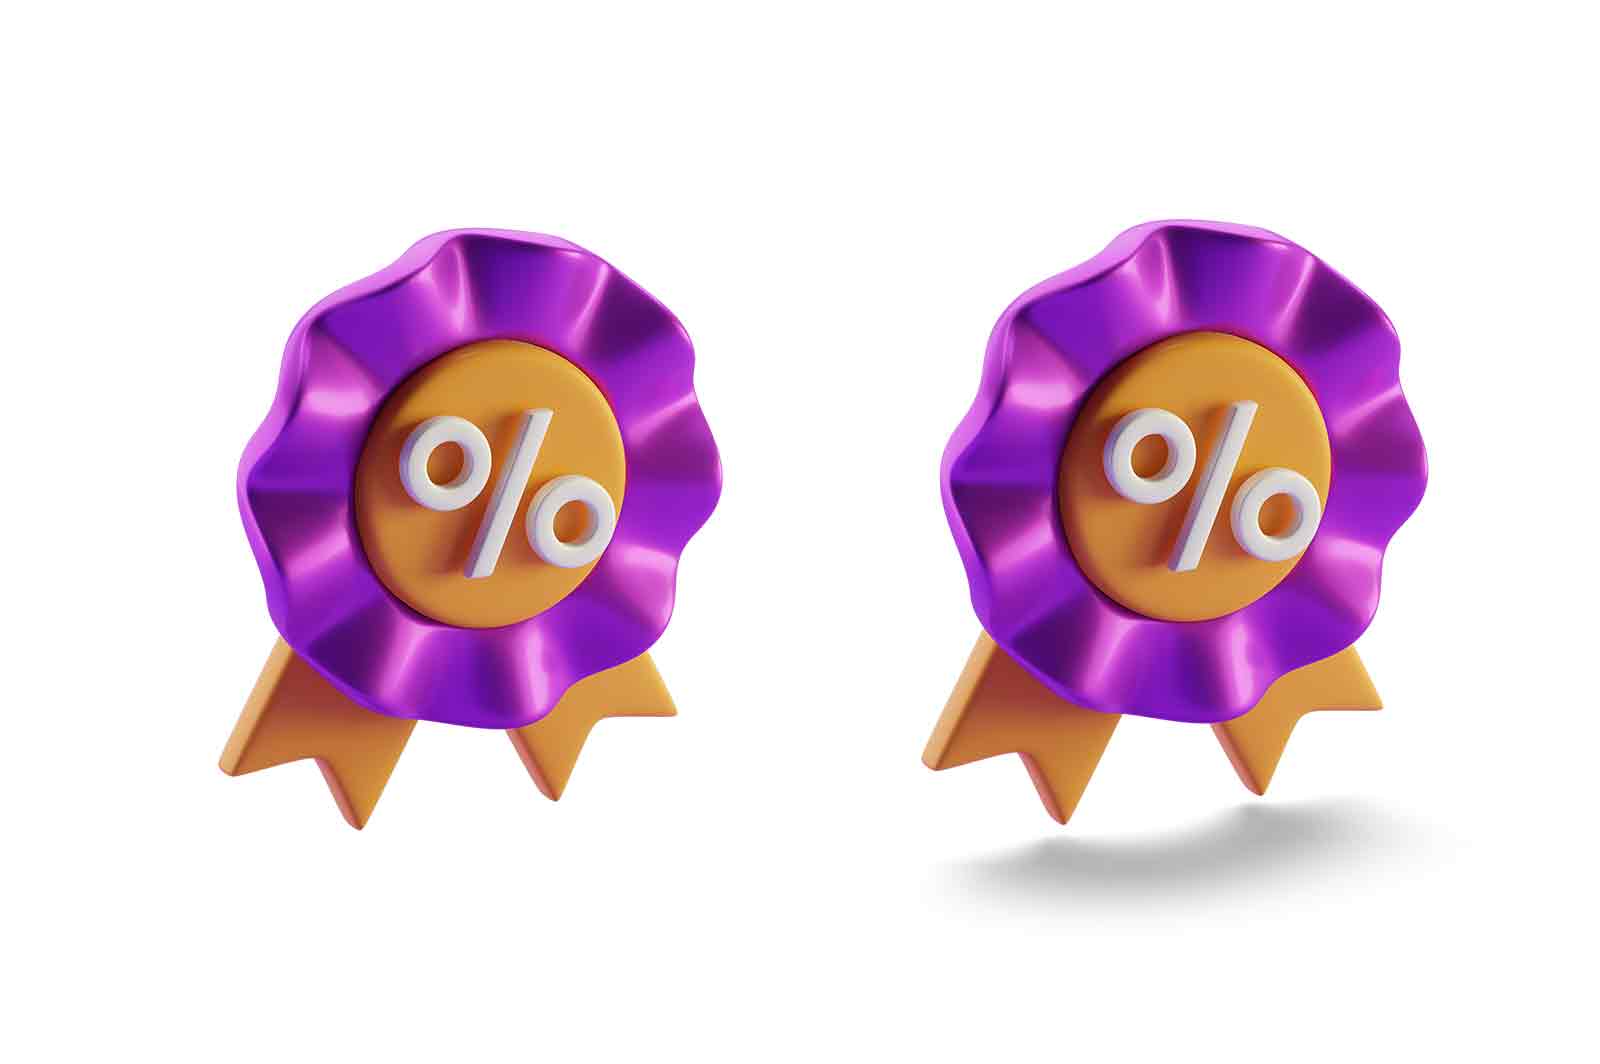 Promotion discount badge with percent sign 3d rendered icon illustration. Creative marketing retail and promotion campaign concept